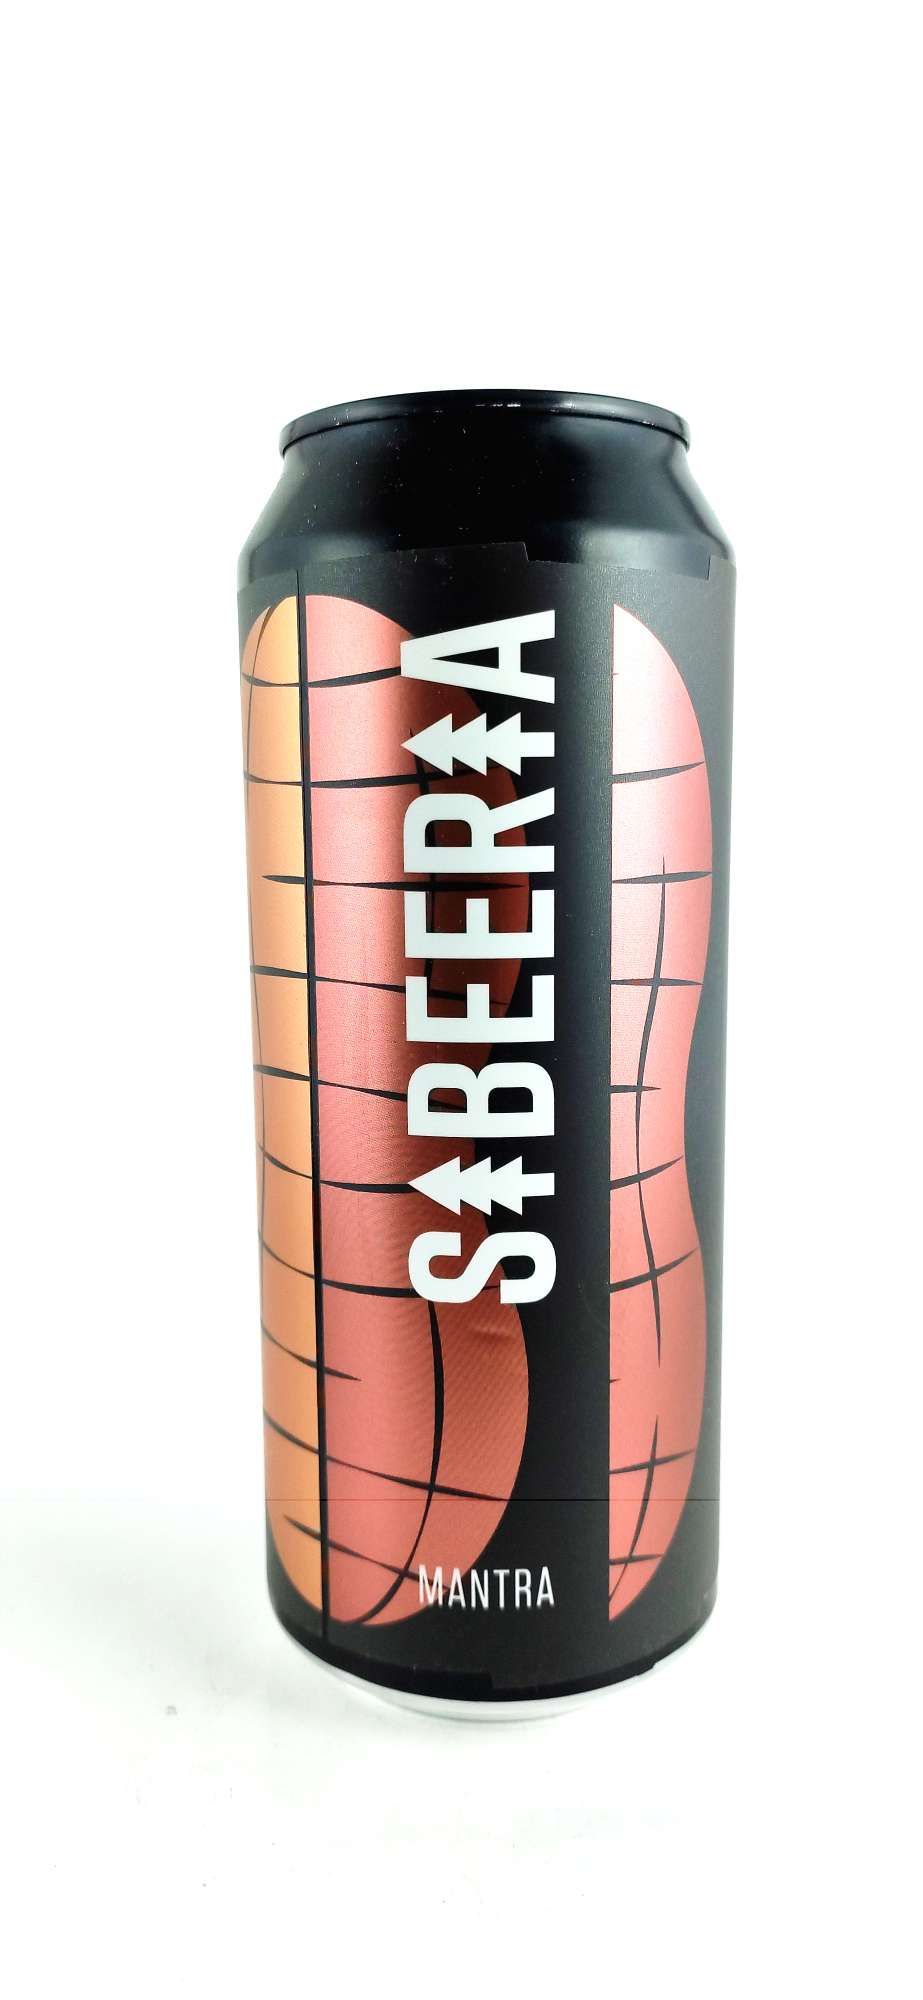 Sibeeria Mantra Imperial Stout w/ Peanut Butter 29°